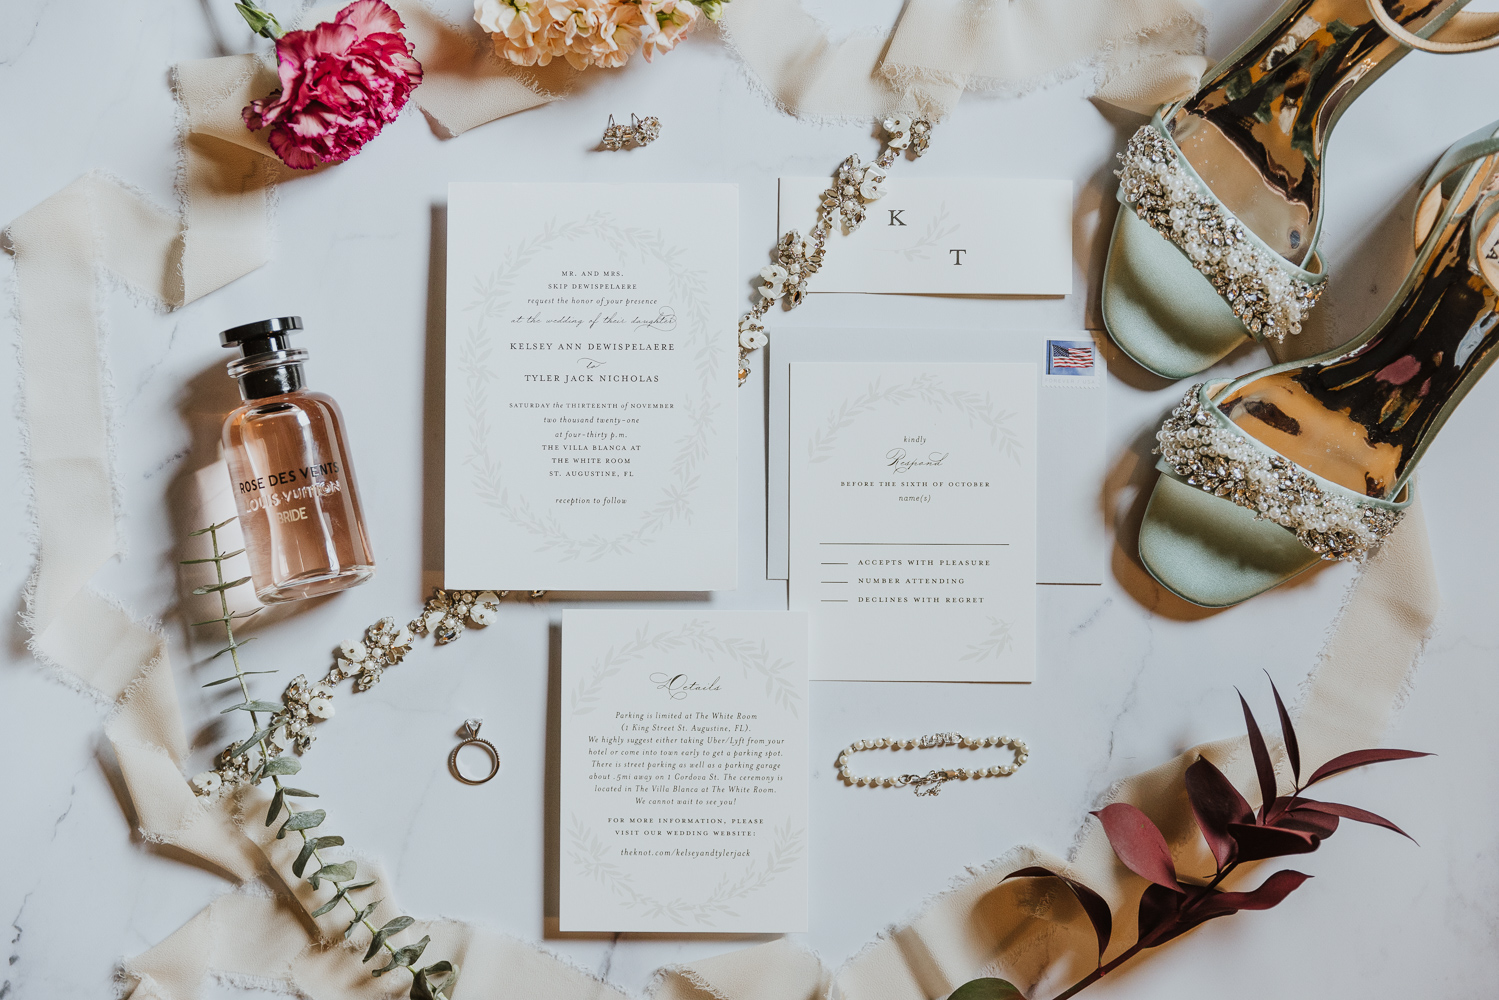 wedding invitations and bridal details laid out together 